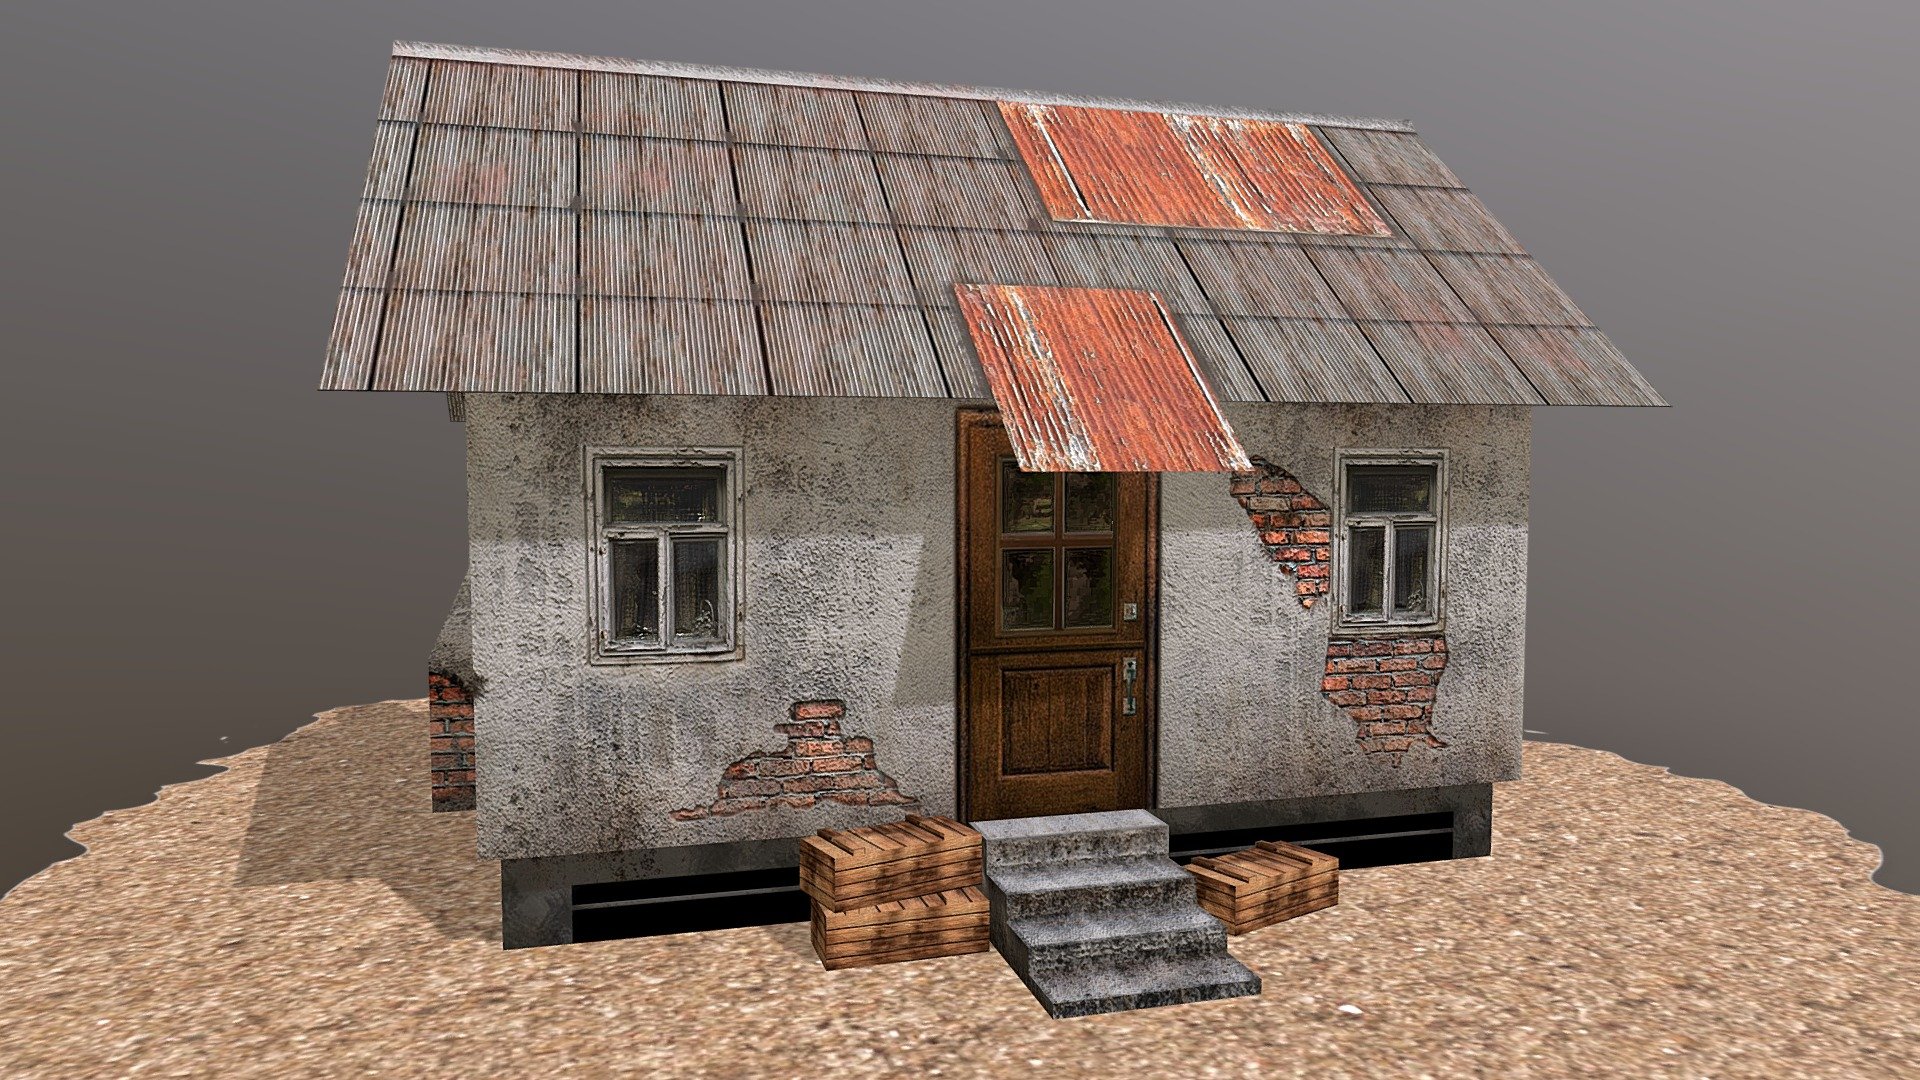 RURAL HUT - LOW POLLY GAME ASSET FOR PC AND MOBILE

MADE IN : AUTODESK MAYA
TEXTURED IN : PHOTOSHOP

ASSIGNED WITH ONE MATERIAL
2048 × 2048 RESOLUTION.

Verts - 203

Edges - 401

Faces - 183

Tris - 372

UVs - 400 - HUT - Buy Royalty Free 3D model by ASHWIN ASHOK (@ASHWINASHOK1822) 3d model